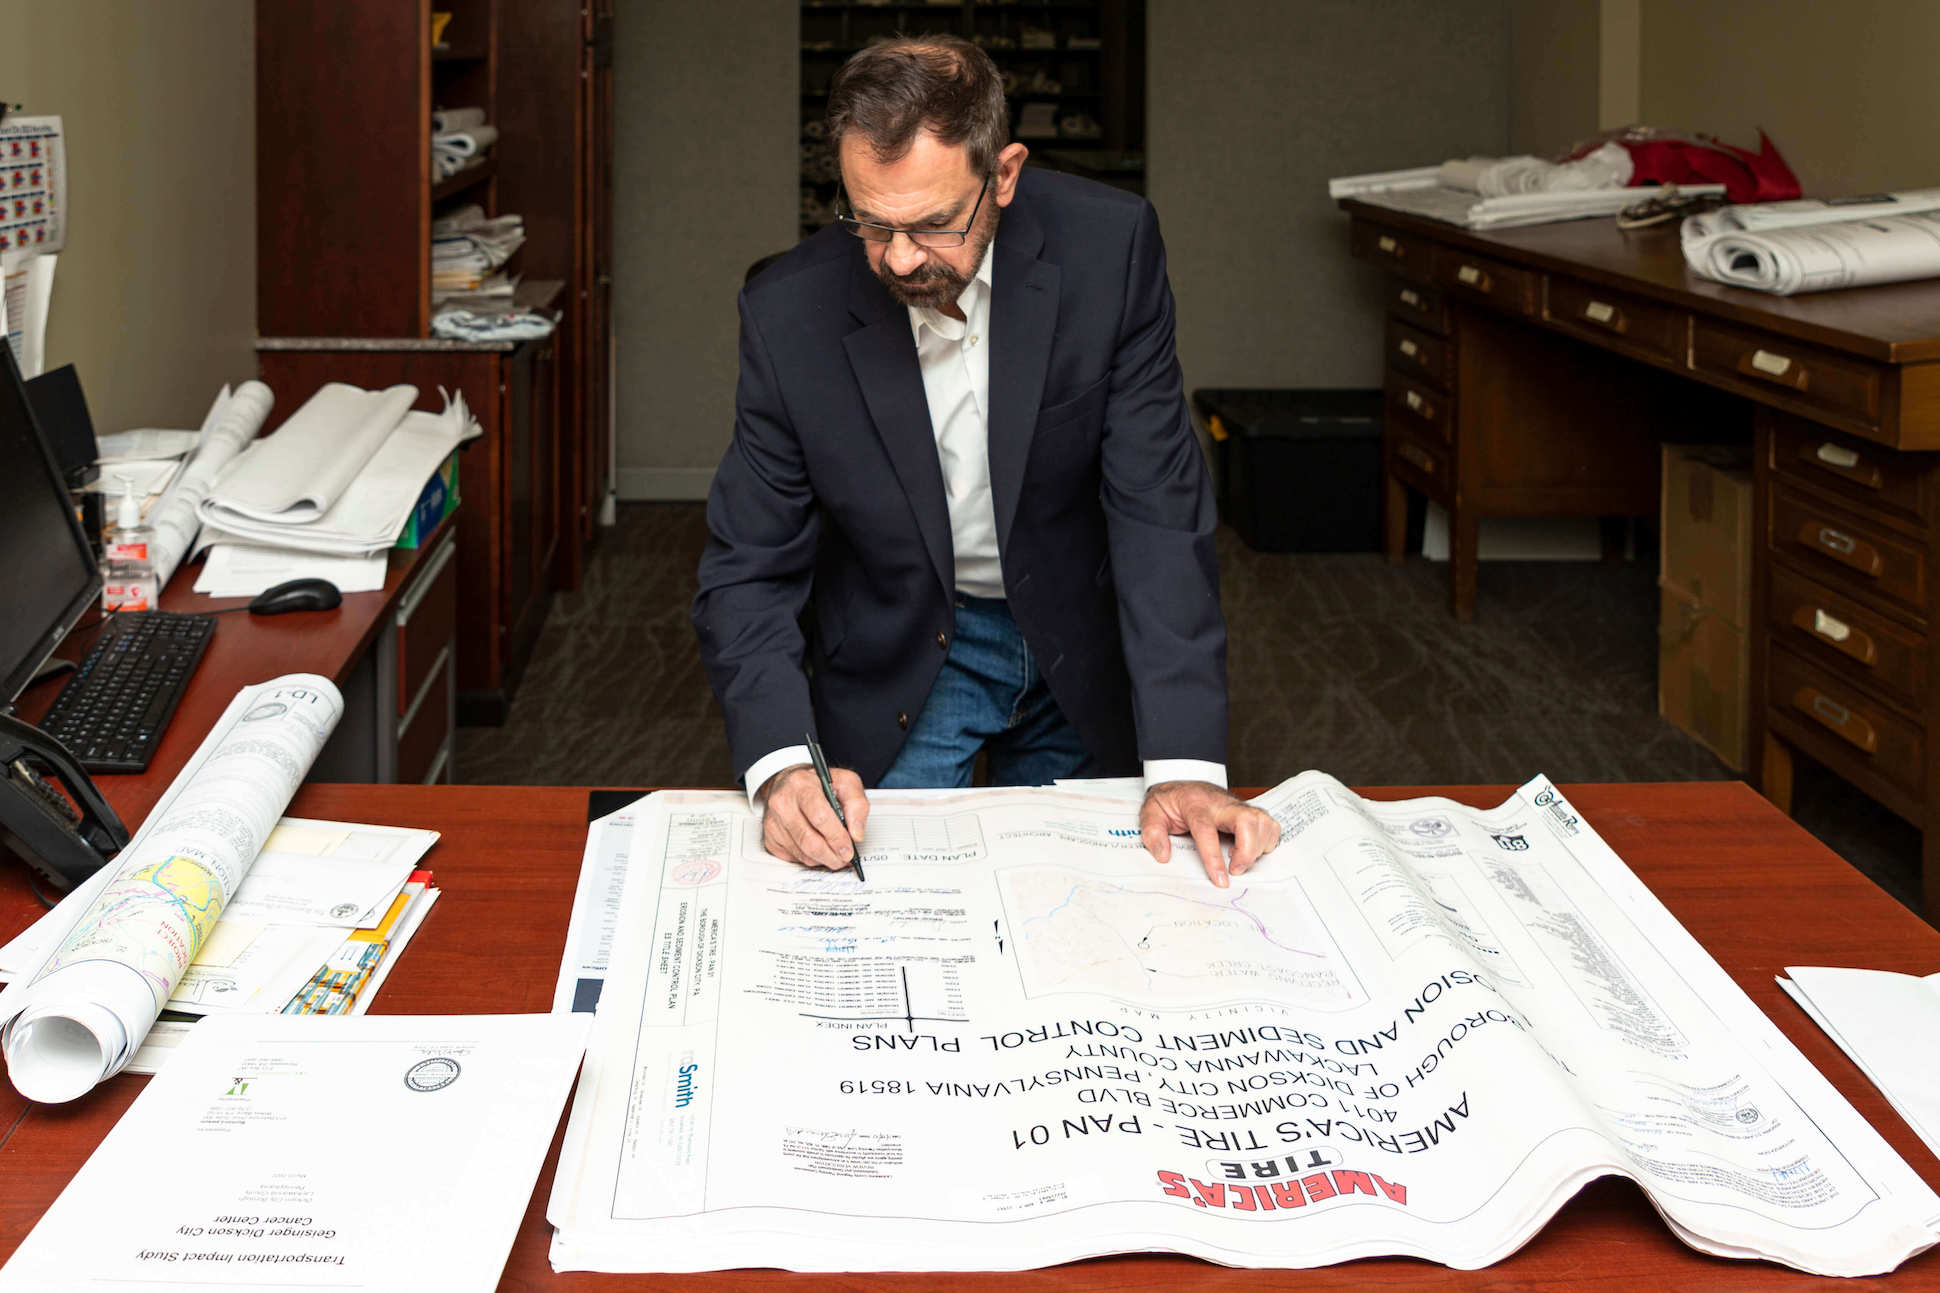 Mike Fedorka standing over plans the size of a desk and signing them.